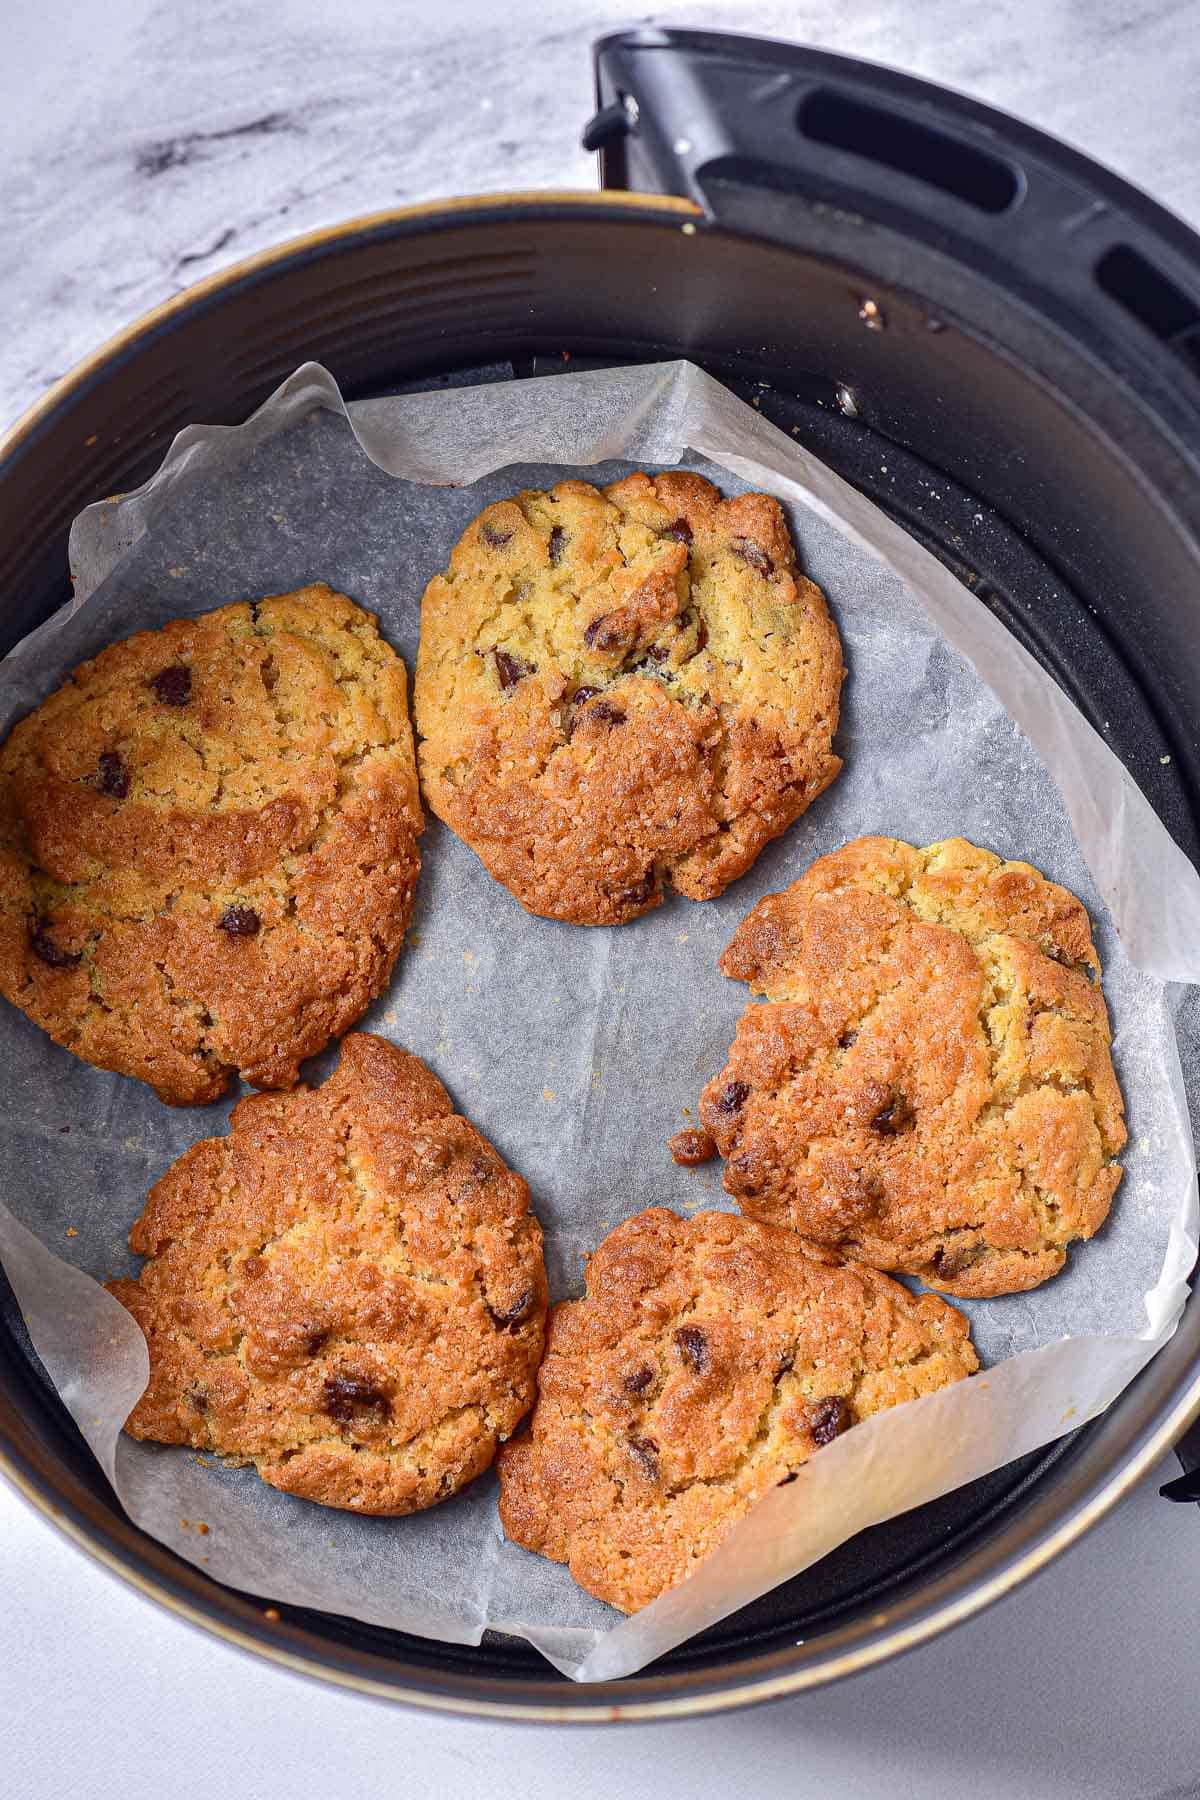 crispy chocolate cookies on parchment paper in round air fryer basket.